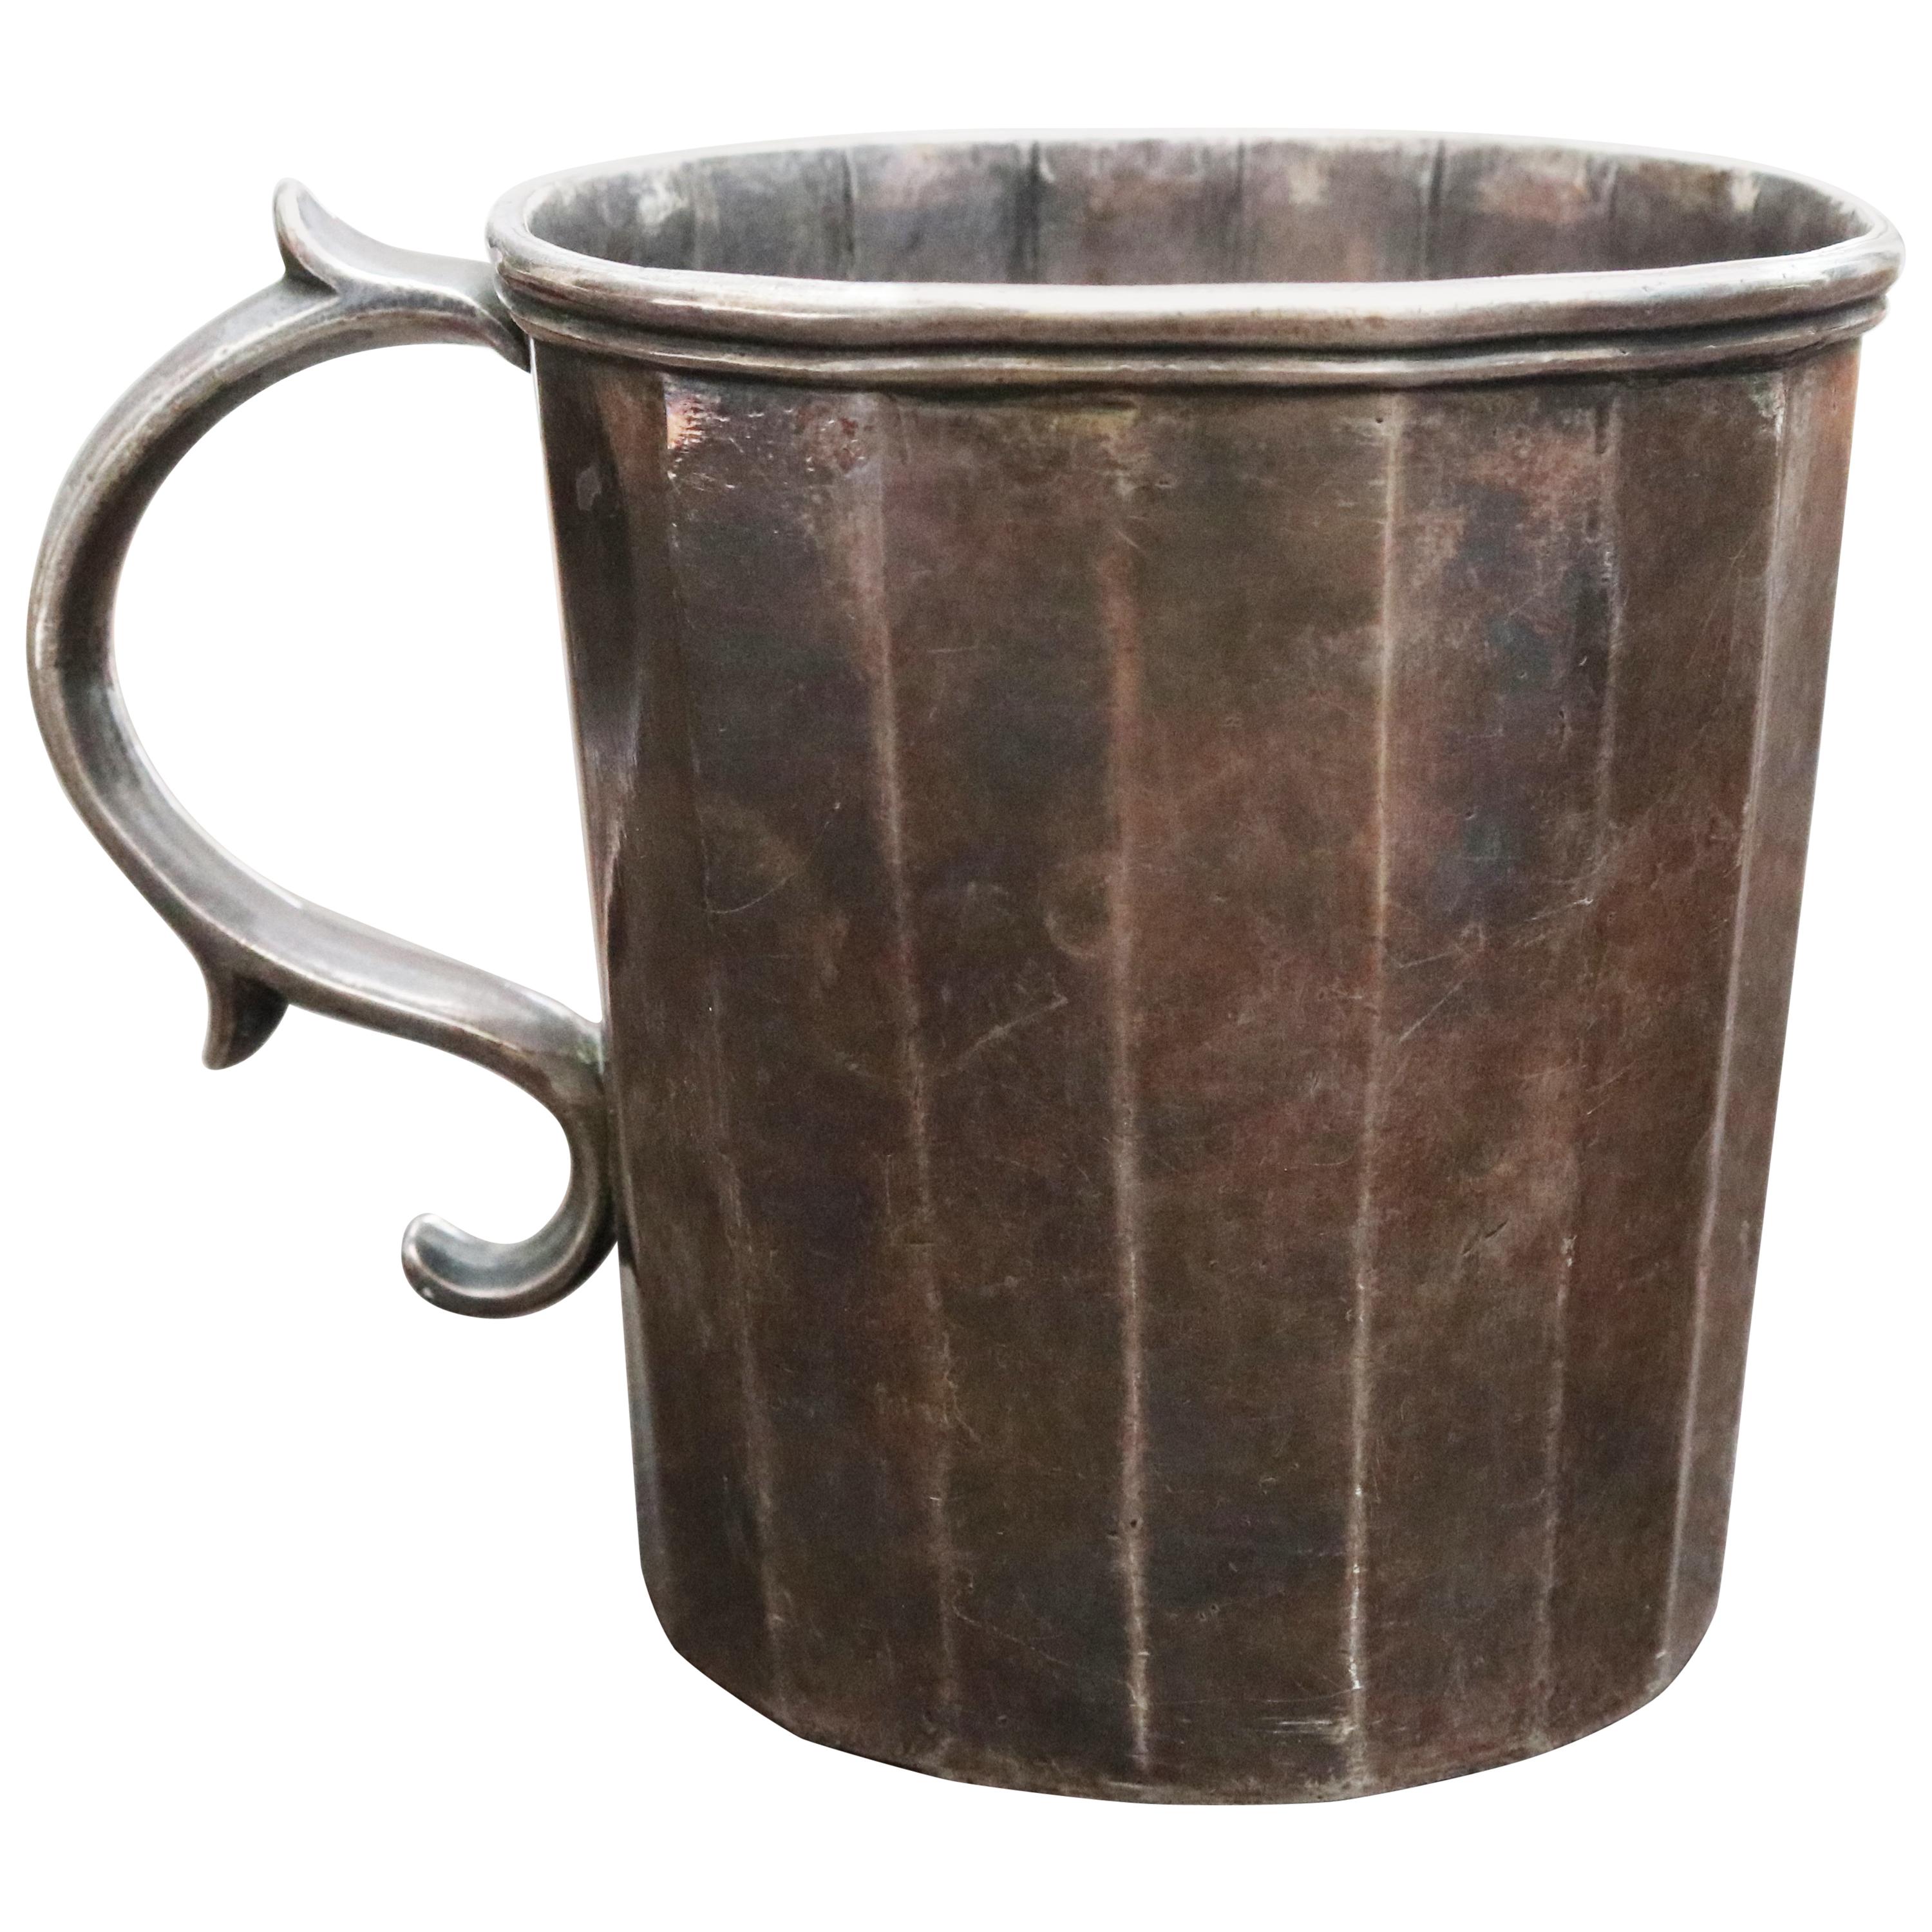 18th Century Silver Cup with Handle Possibly Bolivian